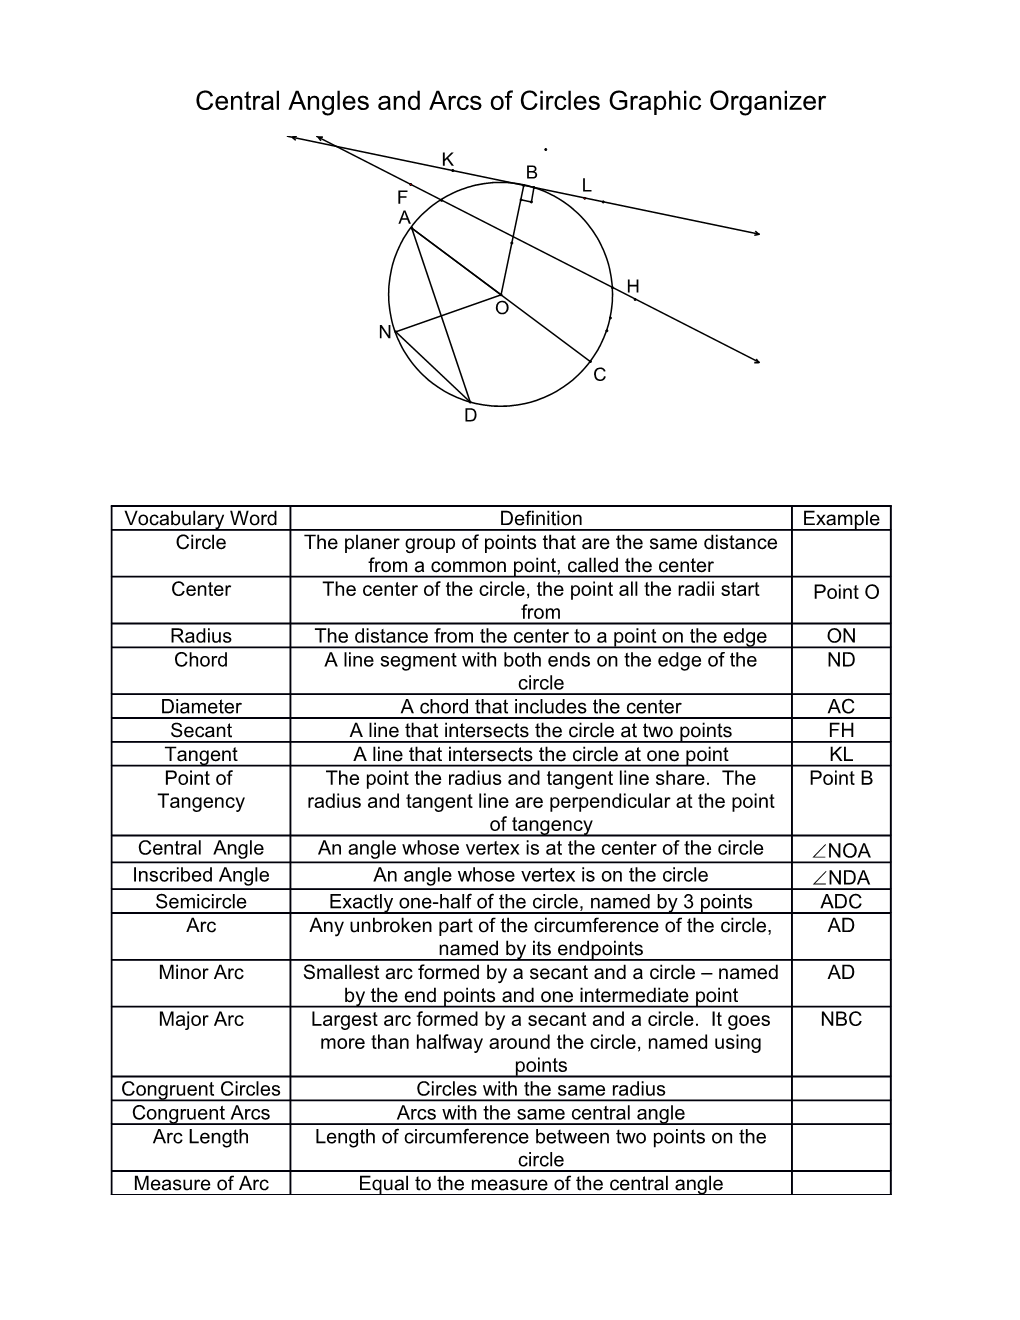 Central Angles and Arcs of Circles Graphic Organizer